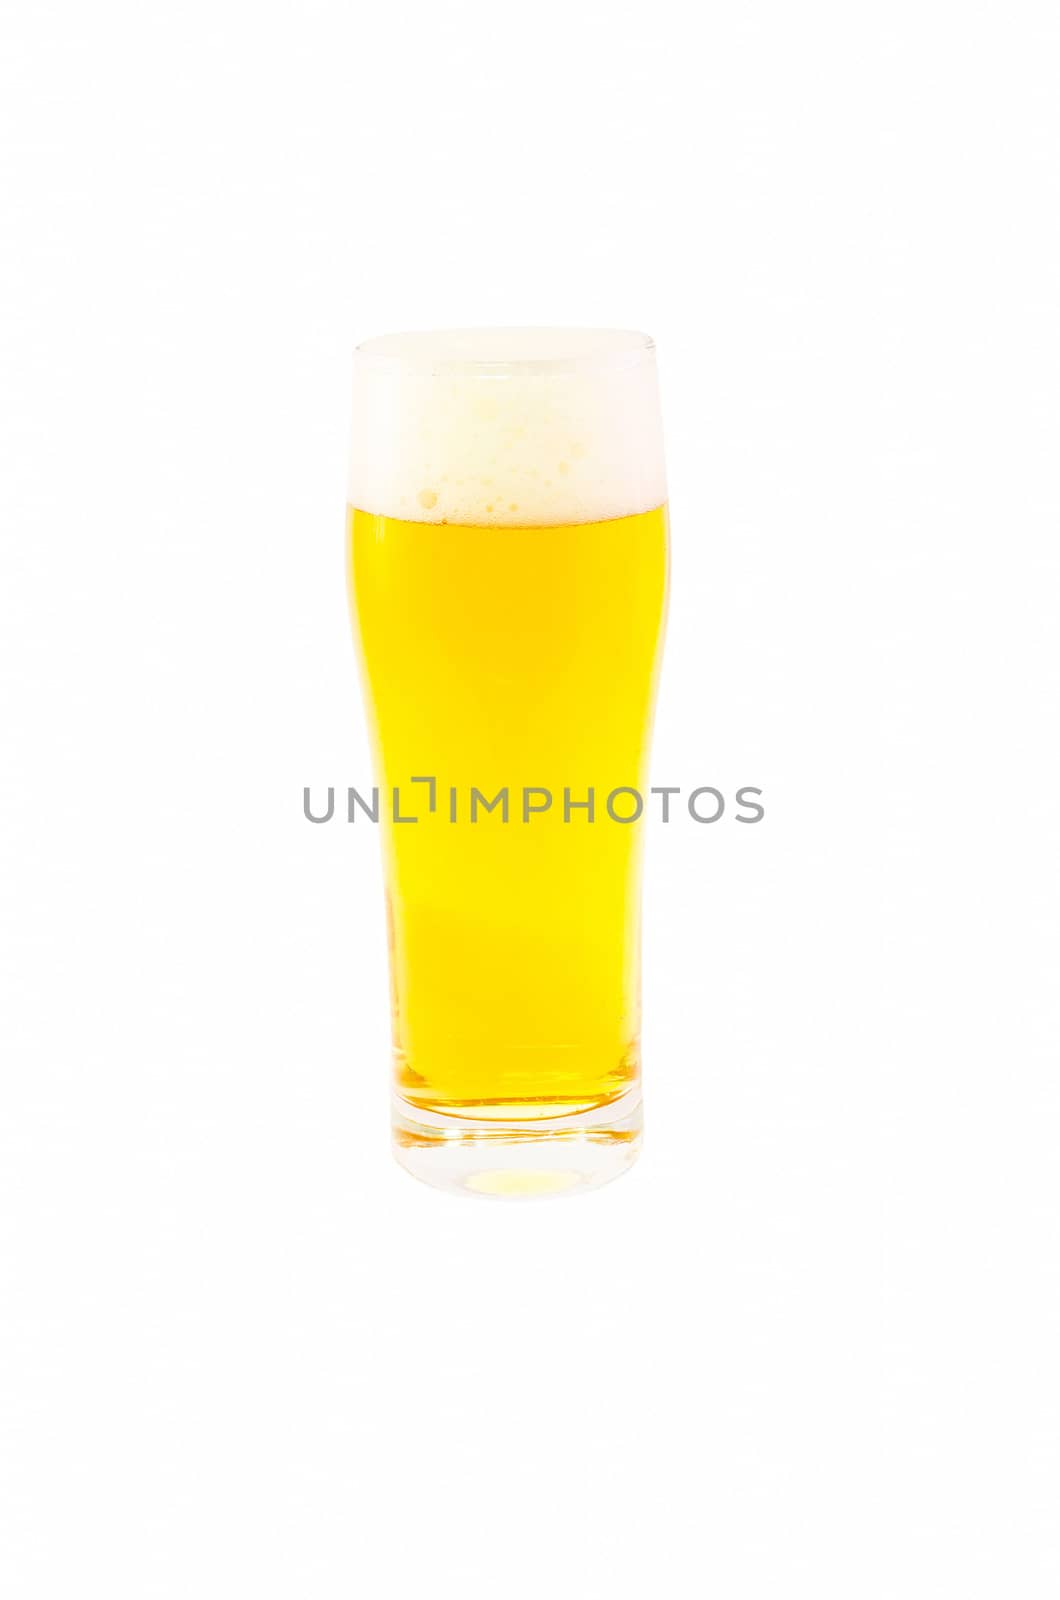 Great Beer glass with beer foam in front of bright background.